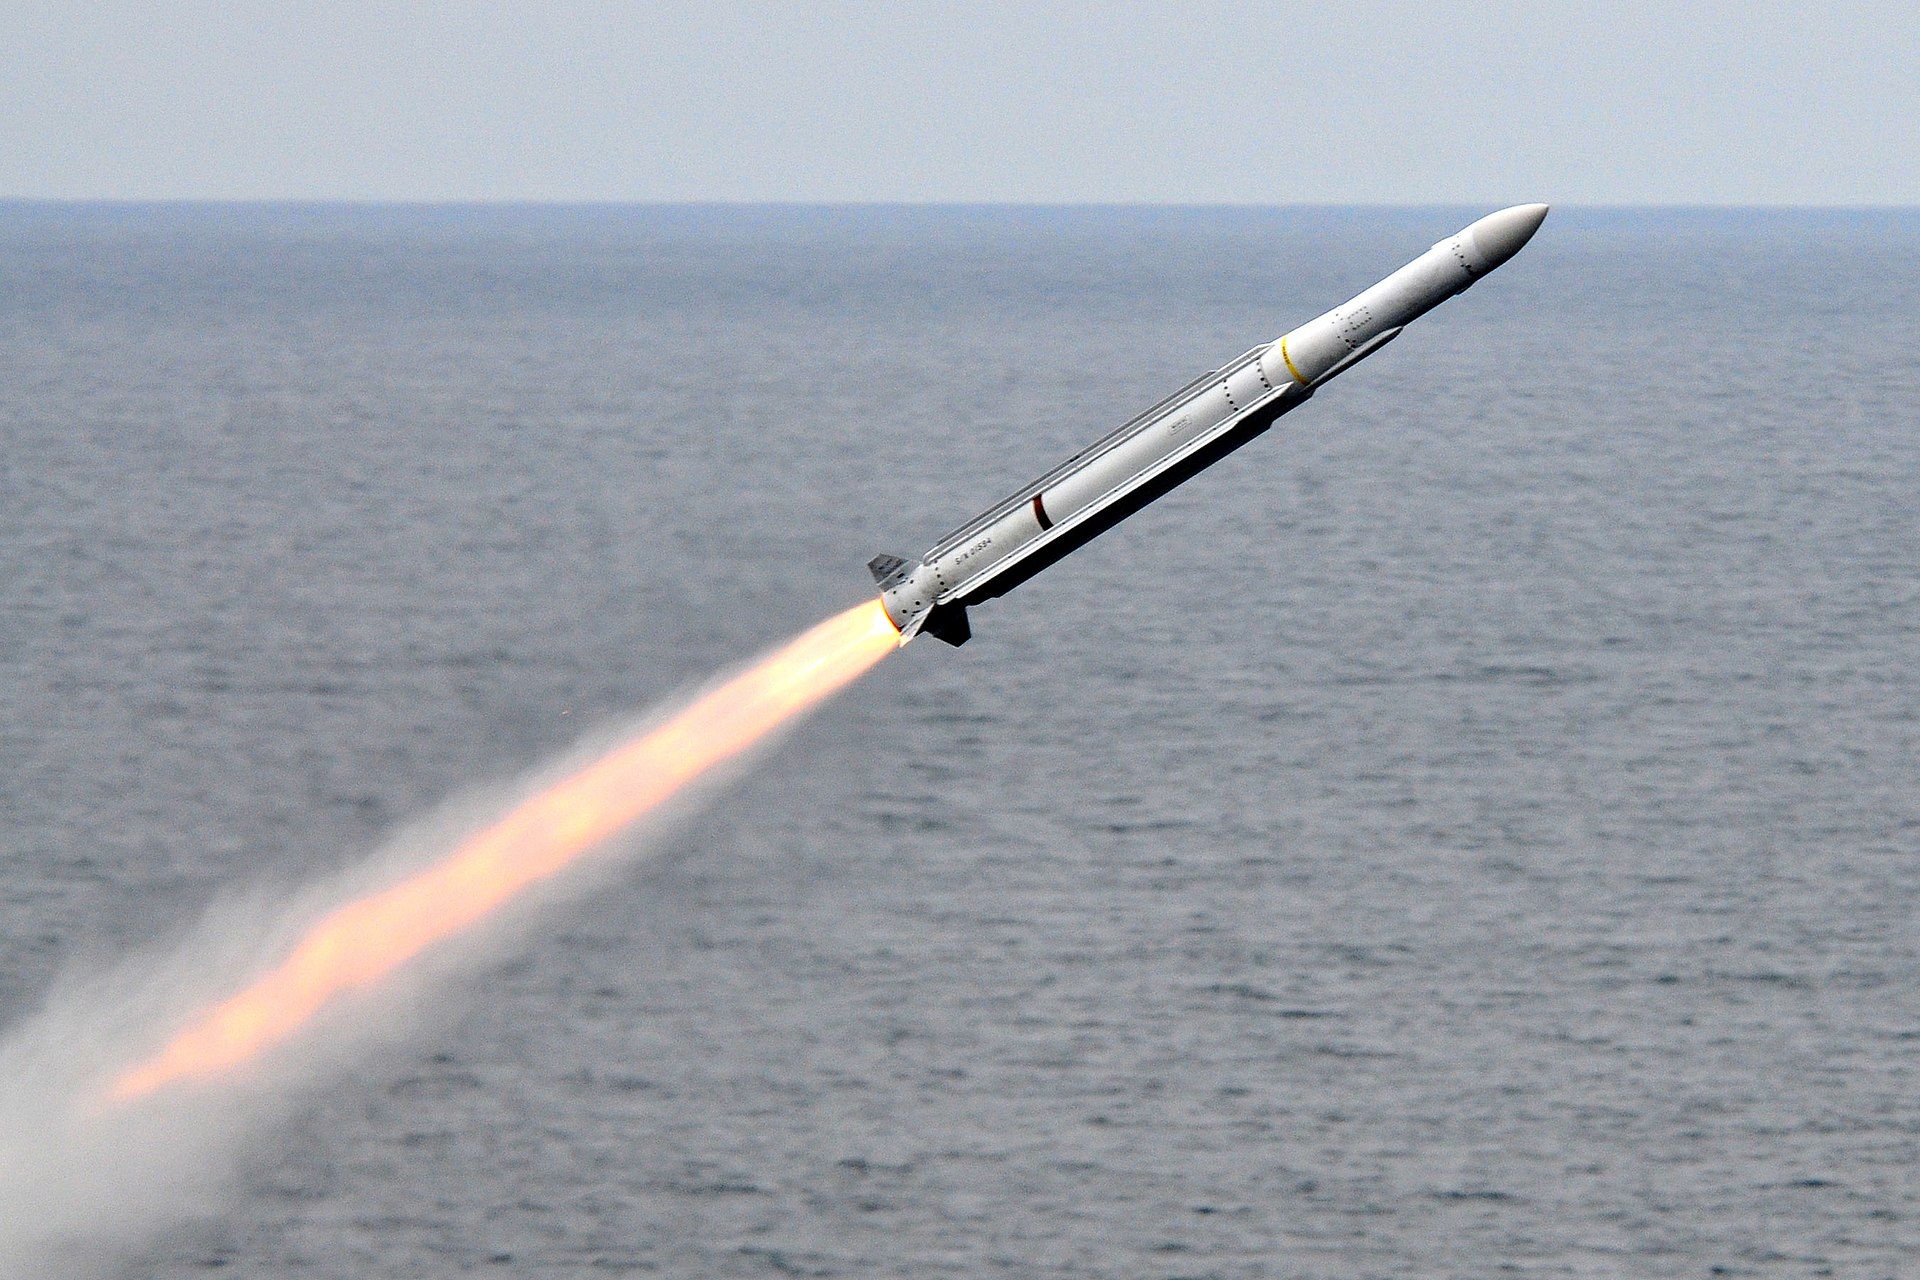 an evolved sea sparrow missile launched from the aircraft carrier uss carl vinson